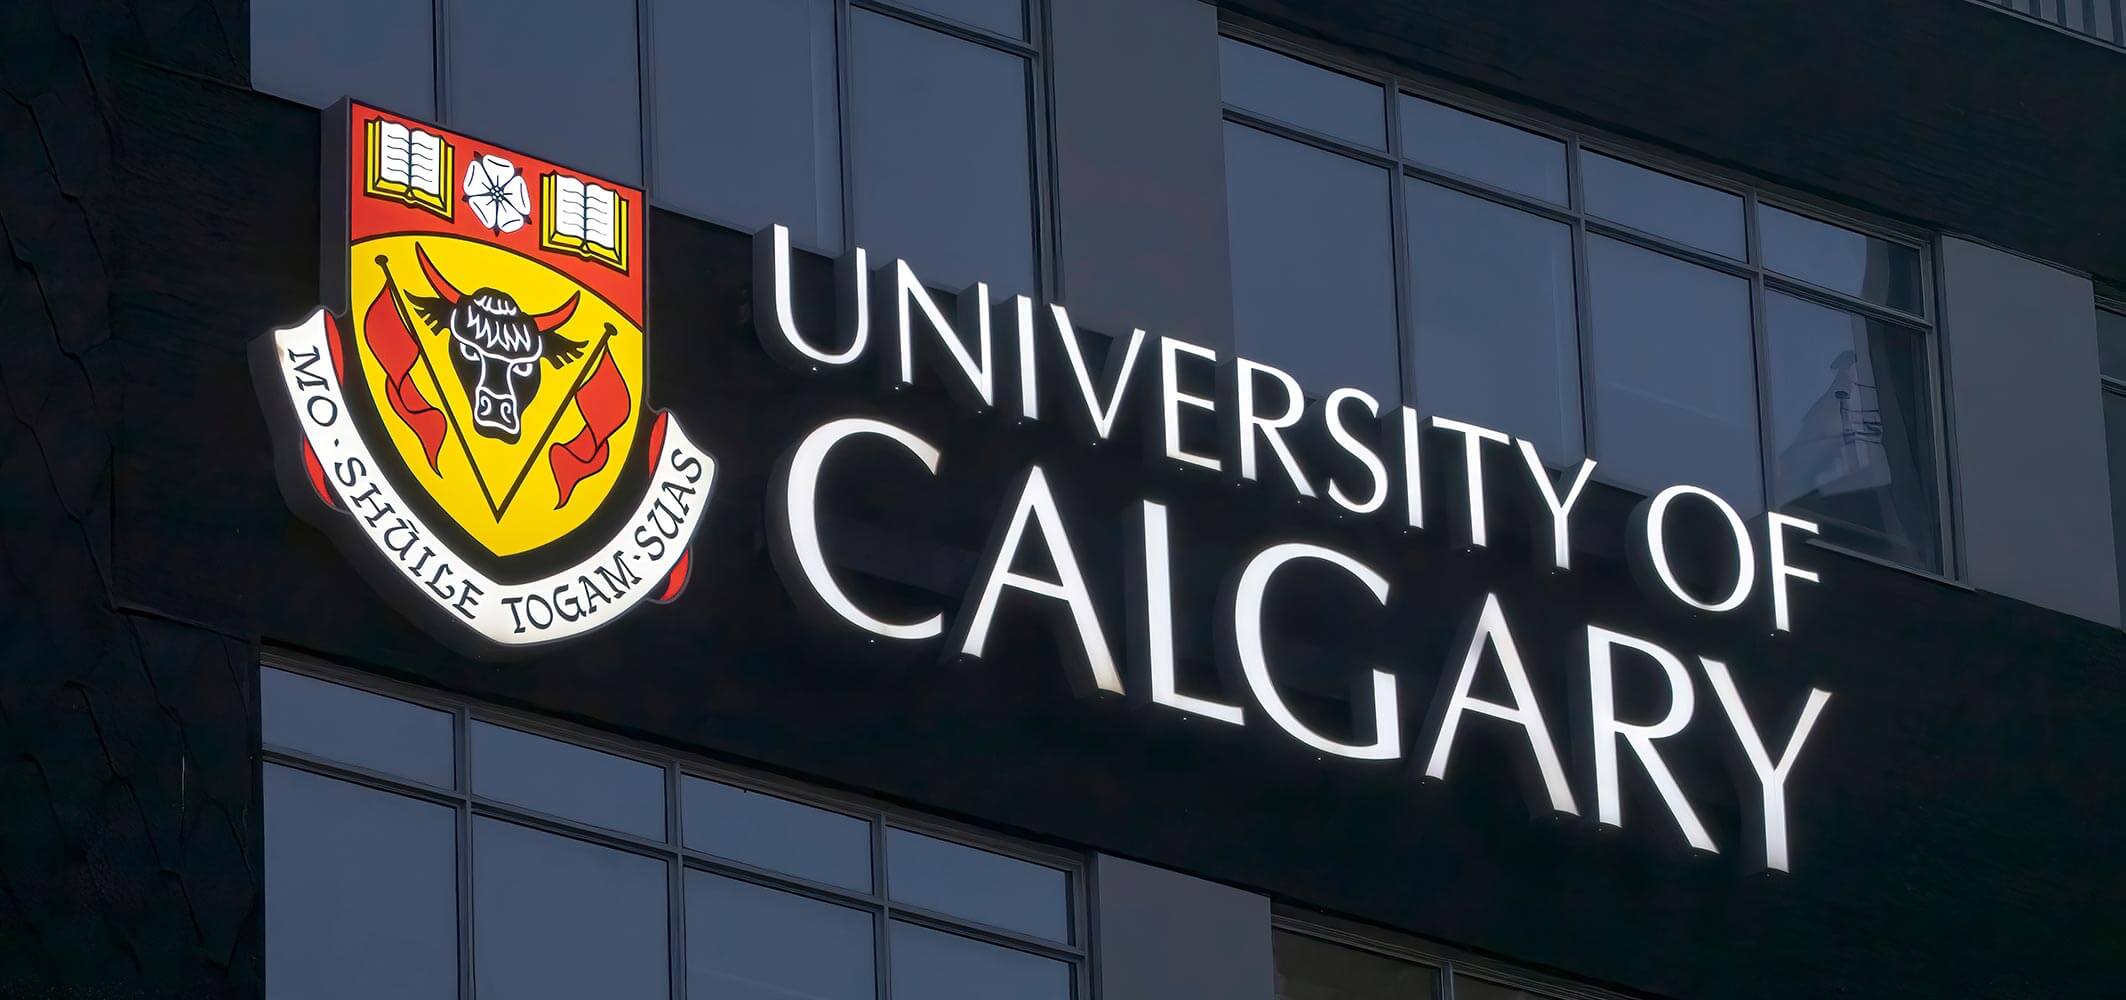 Photo of exterior sign for University of Calgary